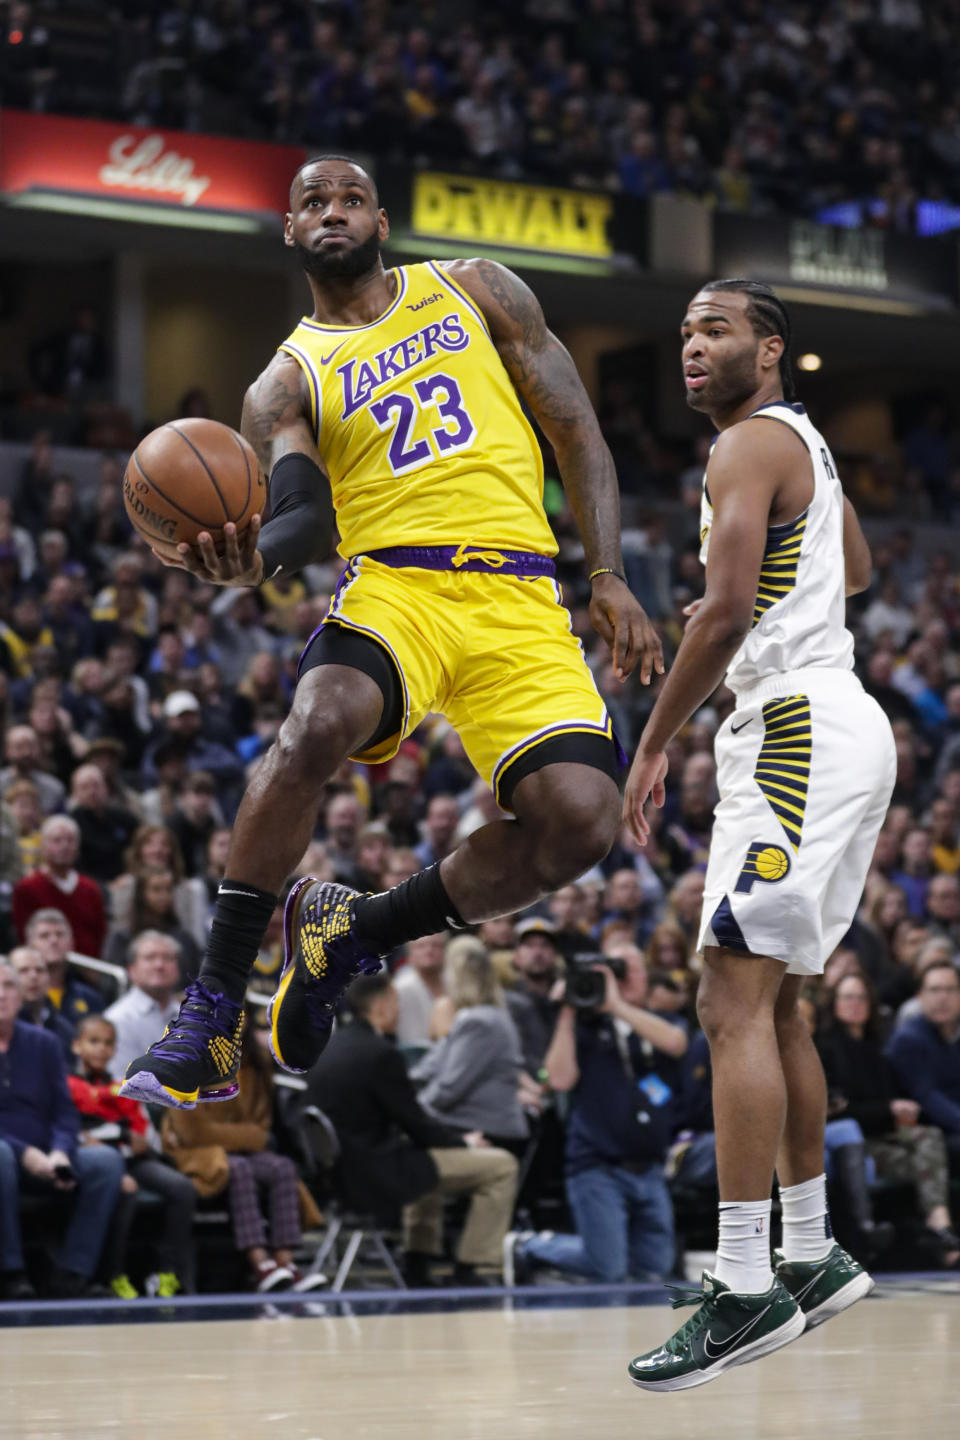 Los Angeles Lakers forward LeBron James (23) shoots behind Indiana Pacers forward T.J. Warren (1) during the first half of an NBA basketball game in Indianapolis, Tuesday, Dec. 17, 2019. (AP Photo/Michael Conroy)